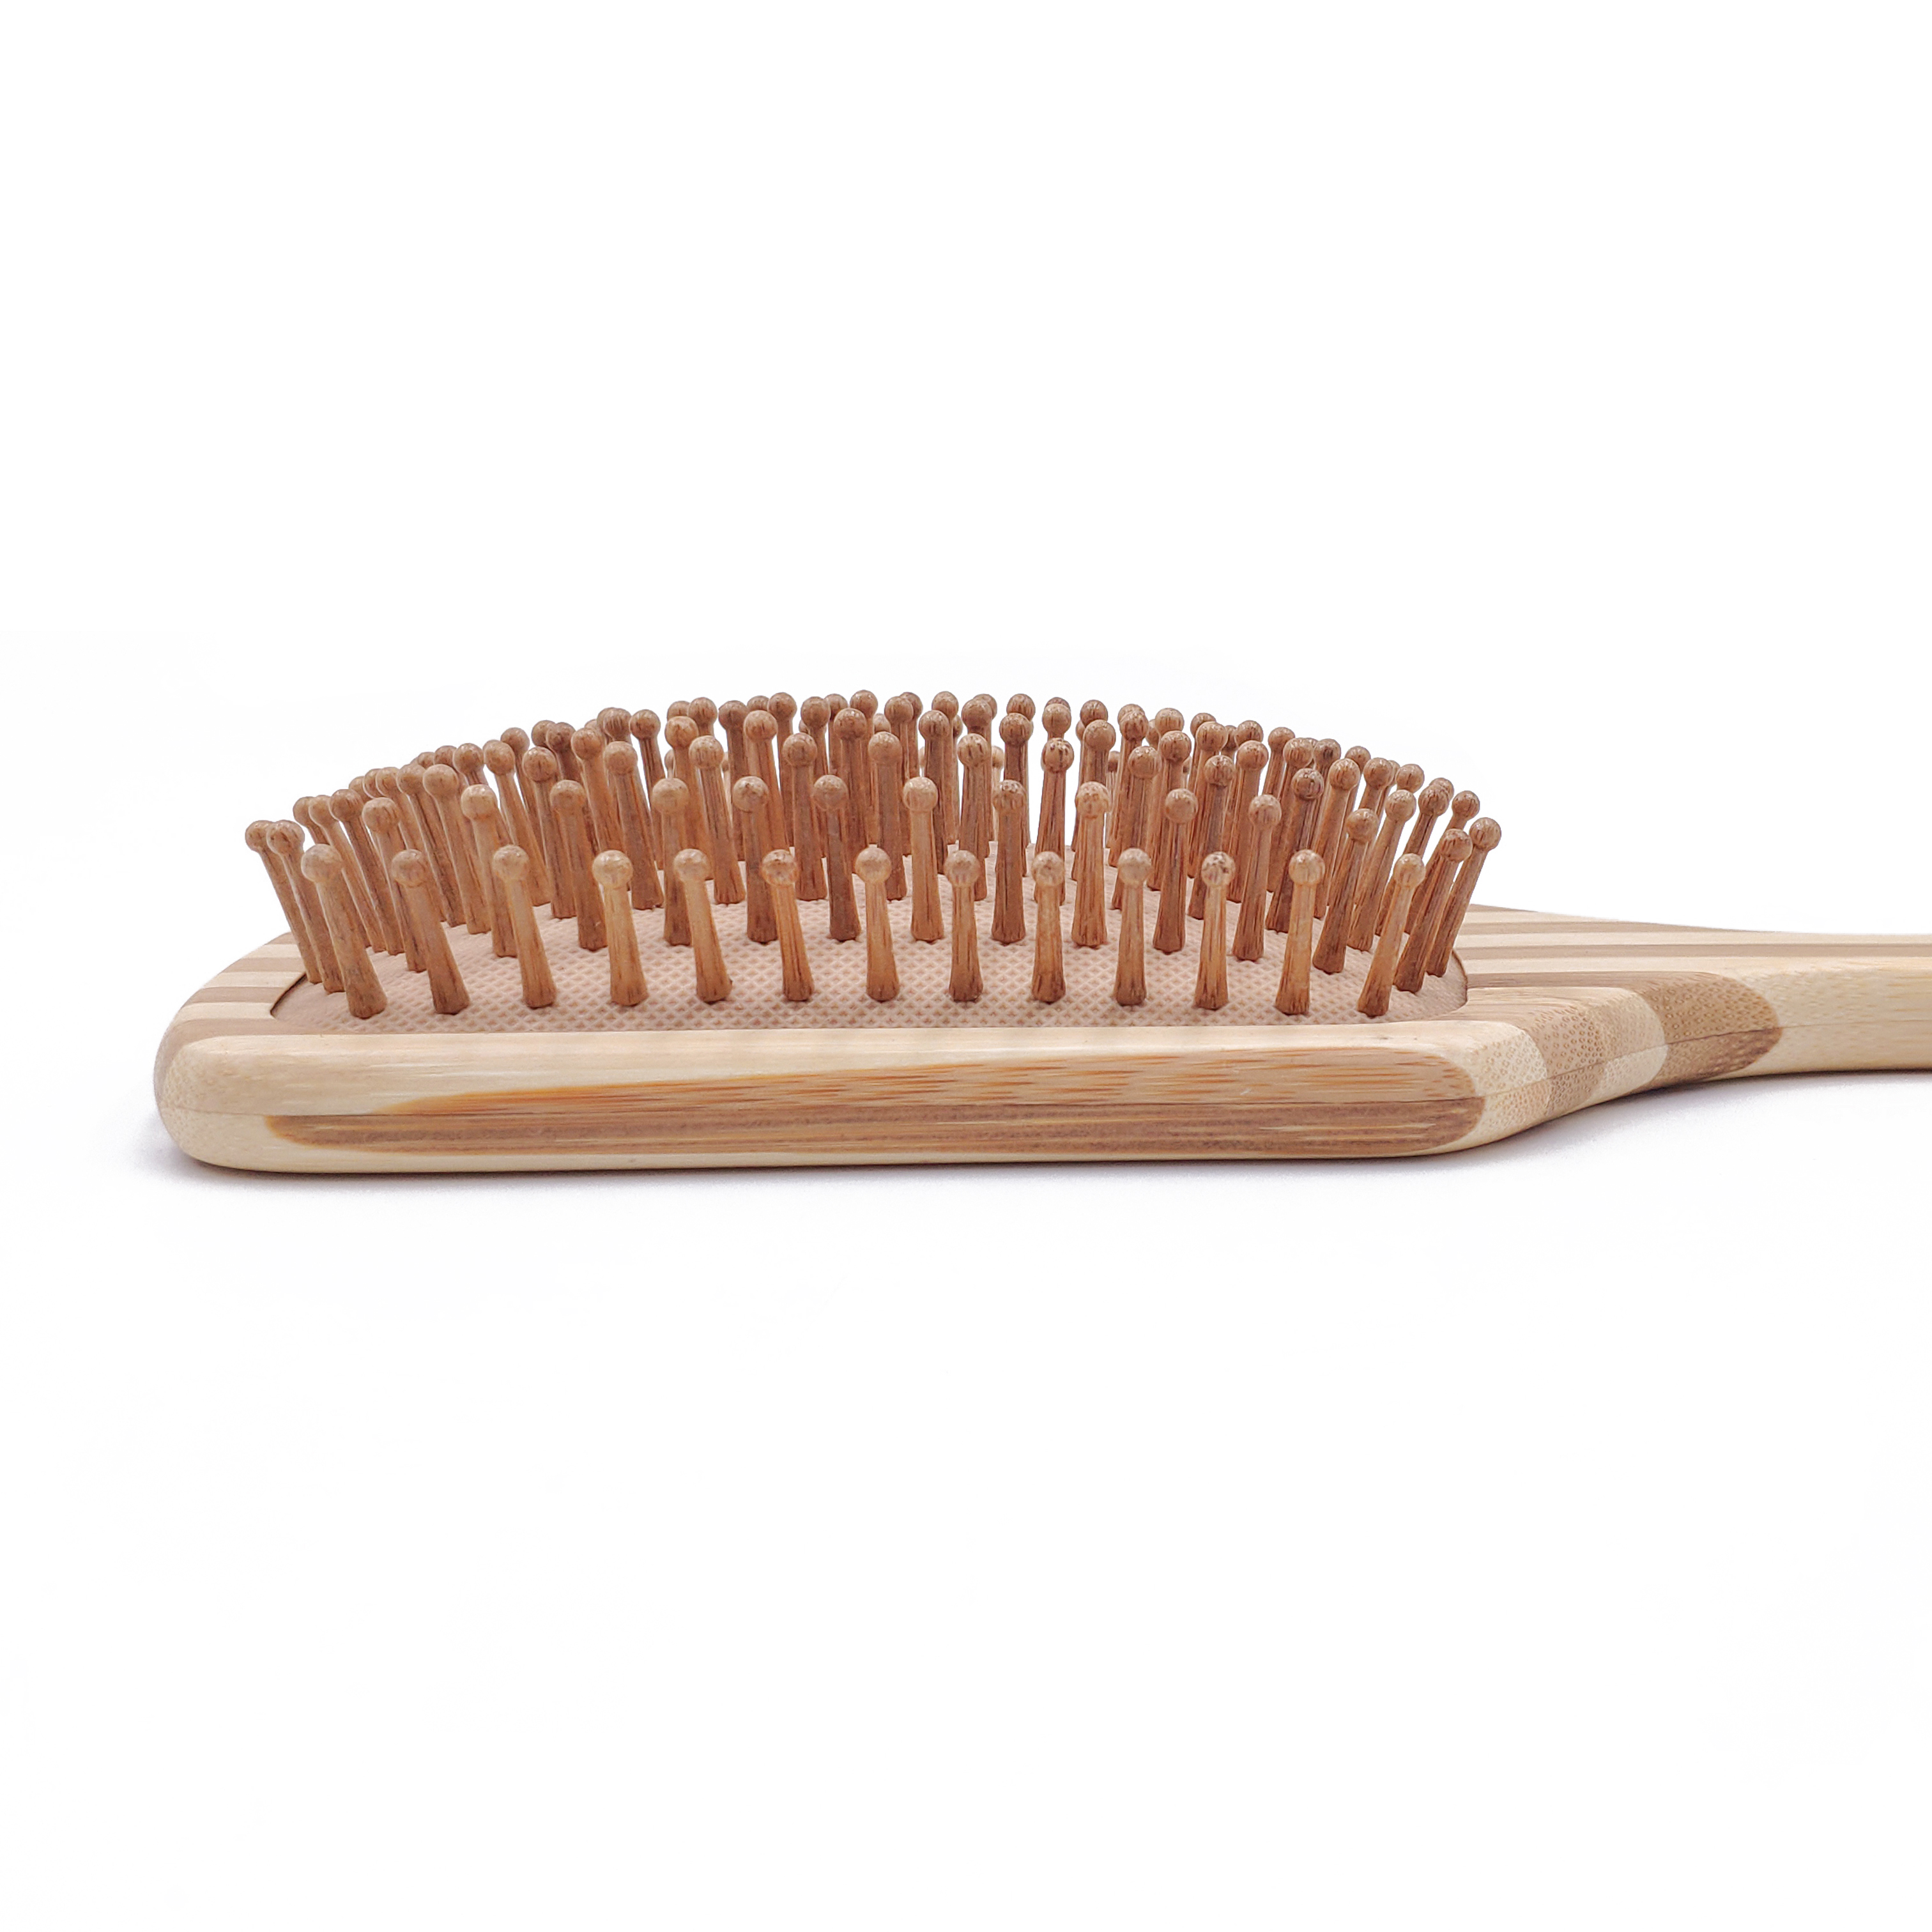 Mixed Color Bamboo Wide Tooth Comb